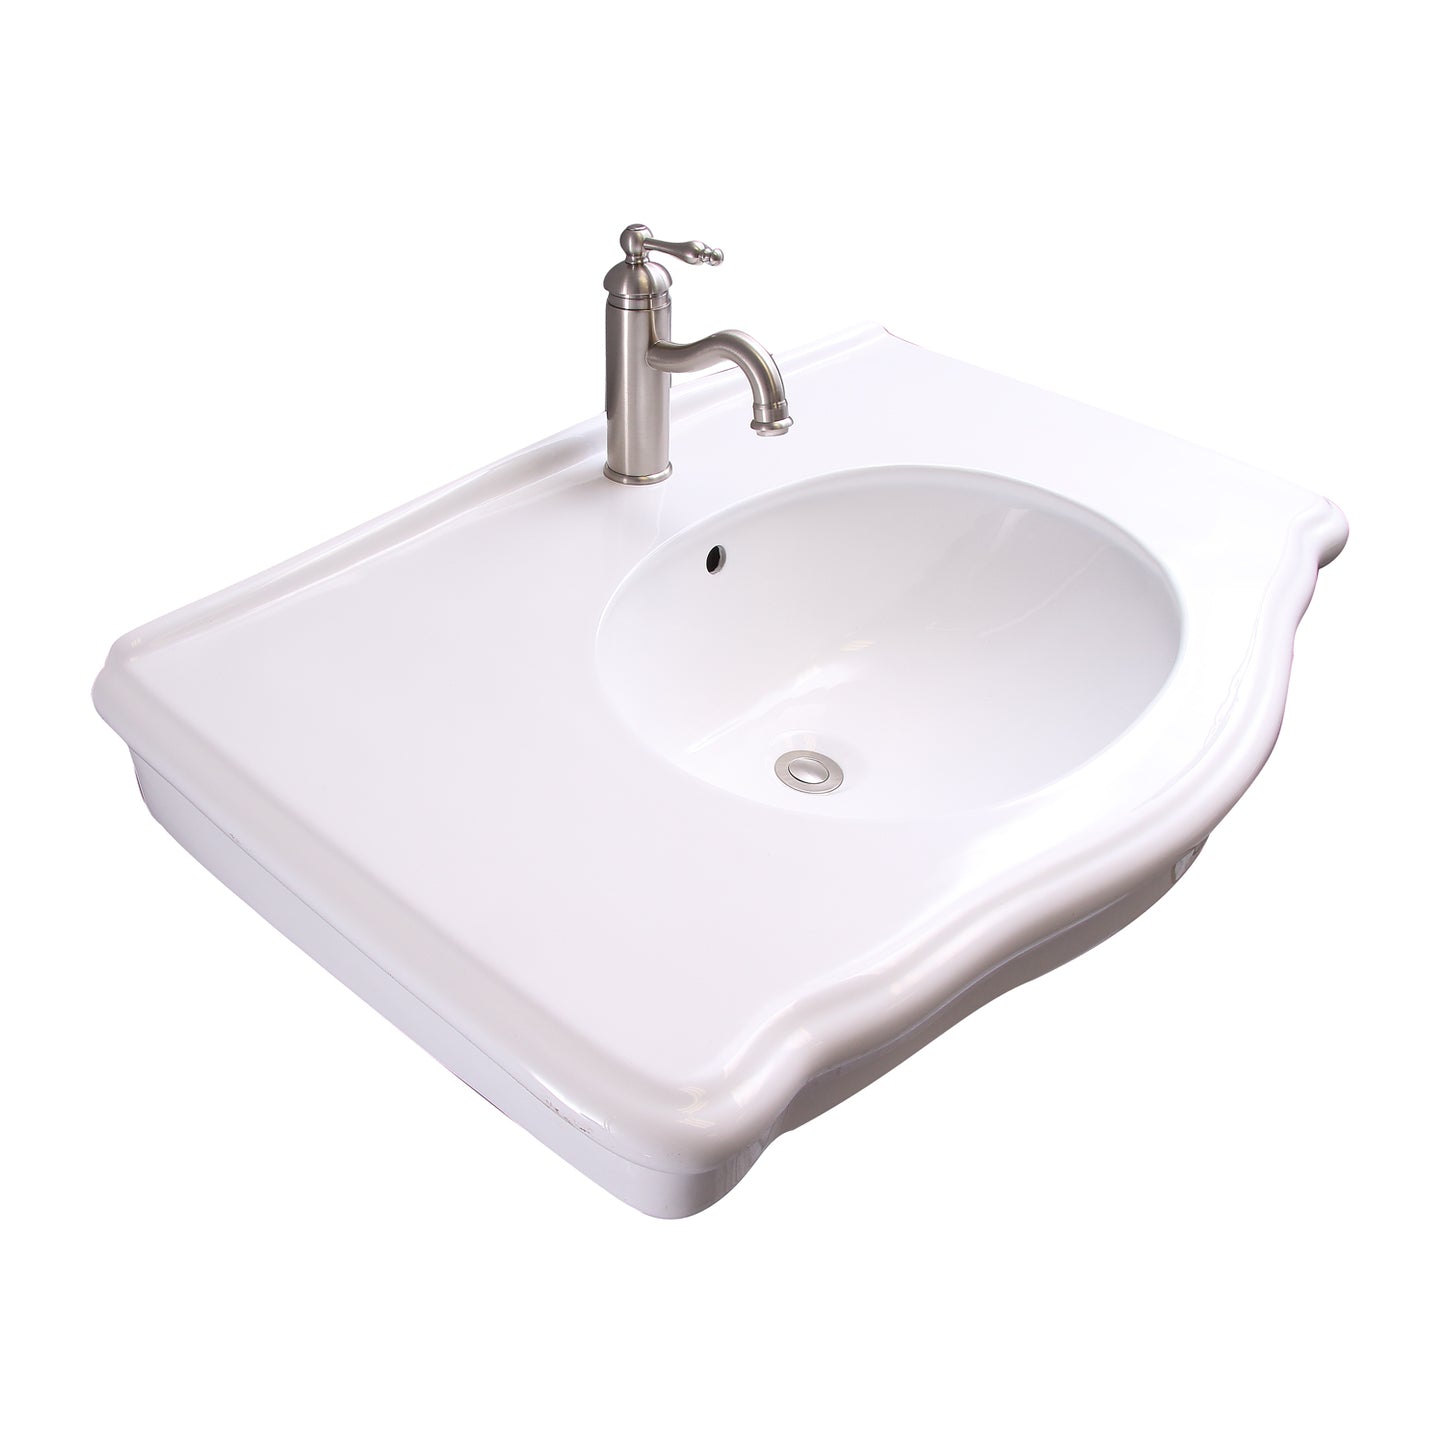 Anders Vanity Wall Hung Sink with 1 Faucet Hole and Overflow in White